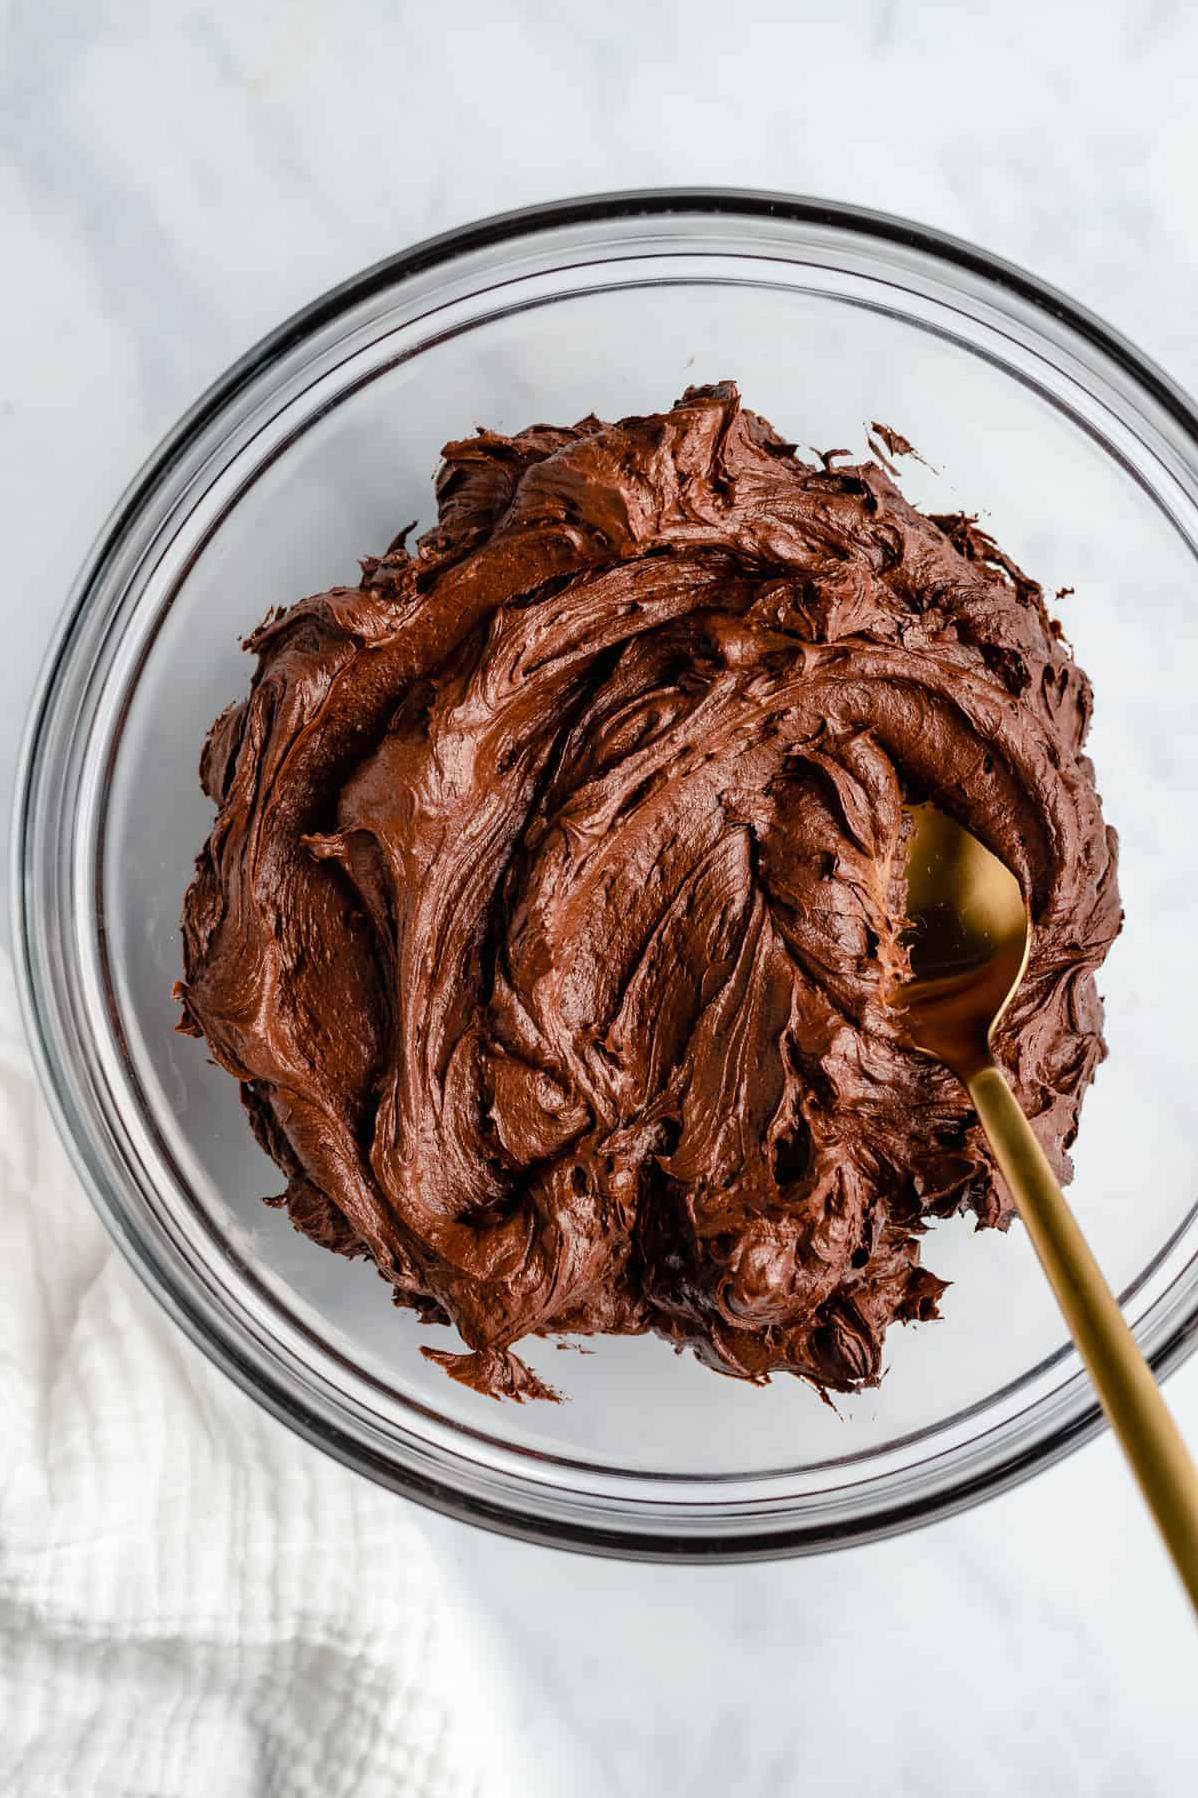  This vegan frosting is so versatile, you can put it on anything!